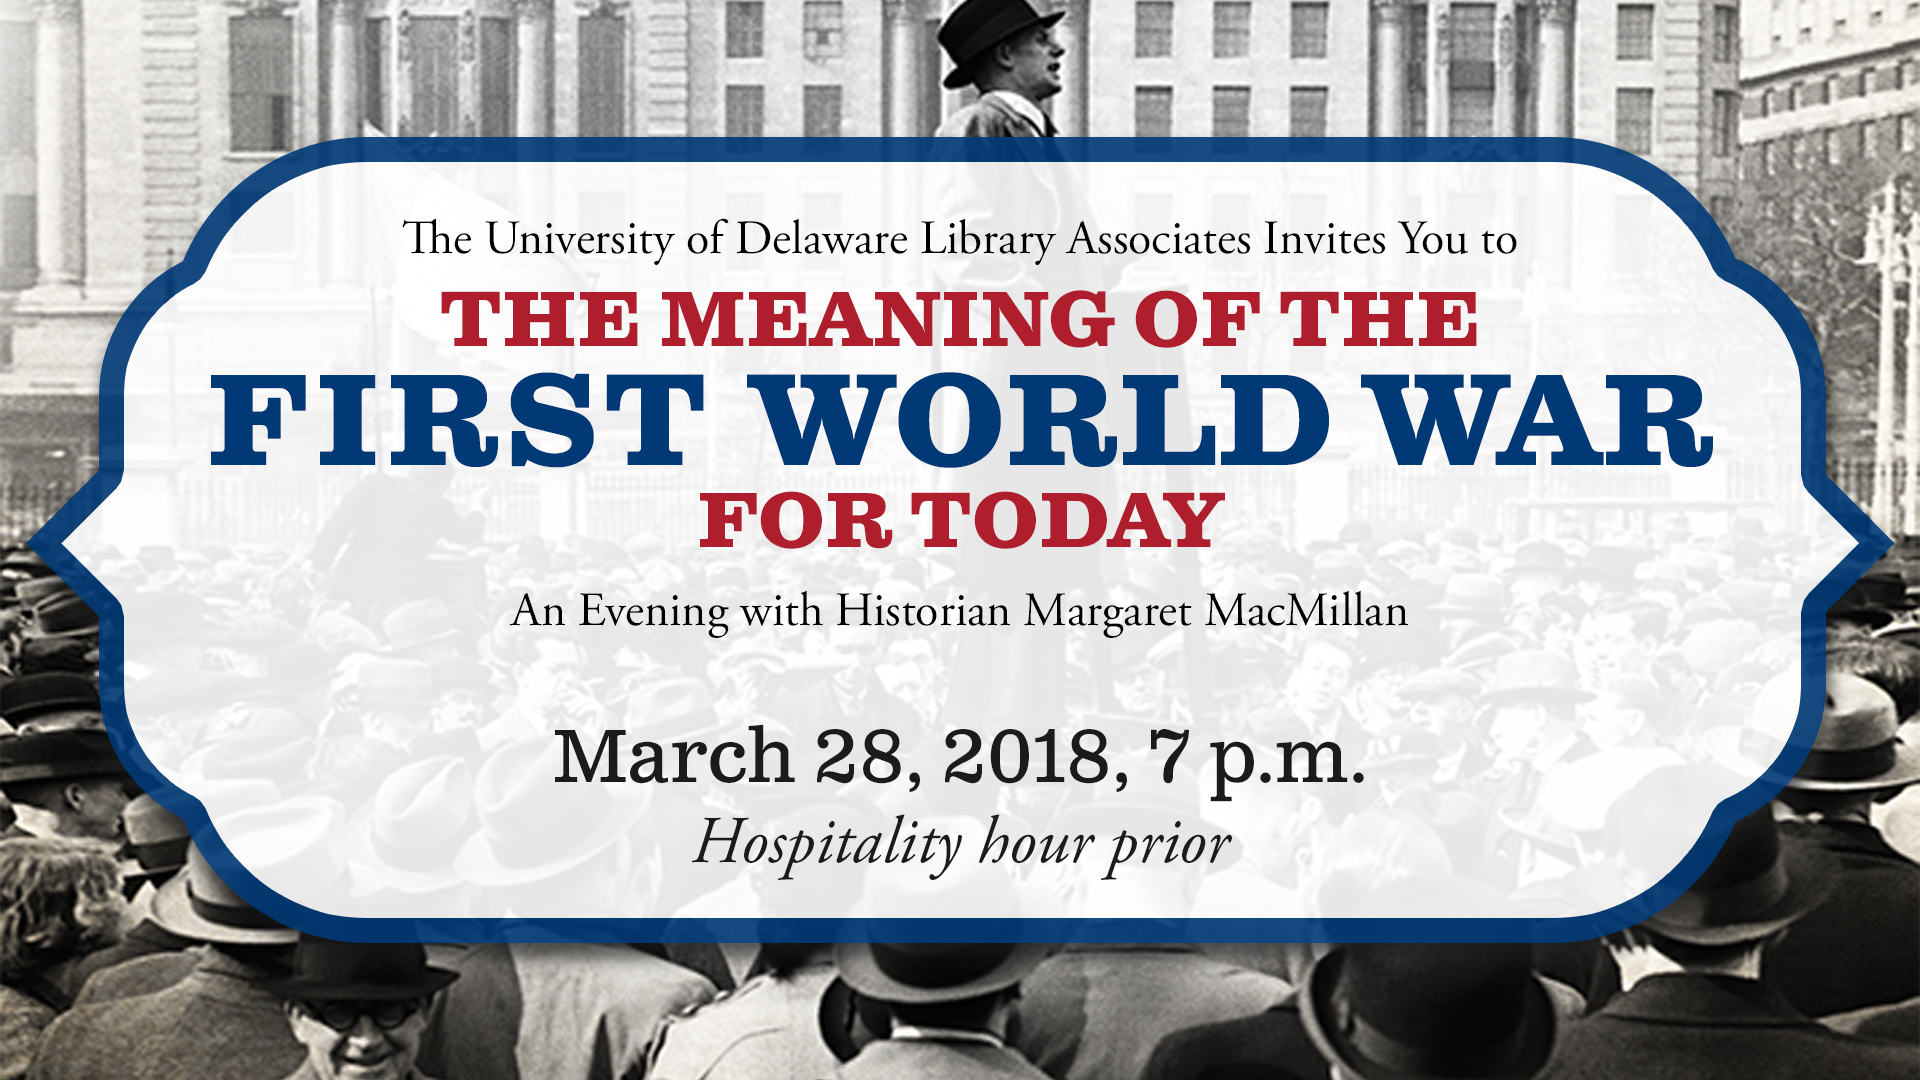 UDLA Annual Dinner: The Meaning of the First World War for Today, An Evening with Historian Margaret MacMillan, March 28, 2018, 7 p.m., Hospitality hour prior, Click here to register.